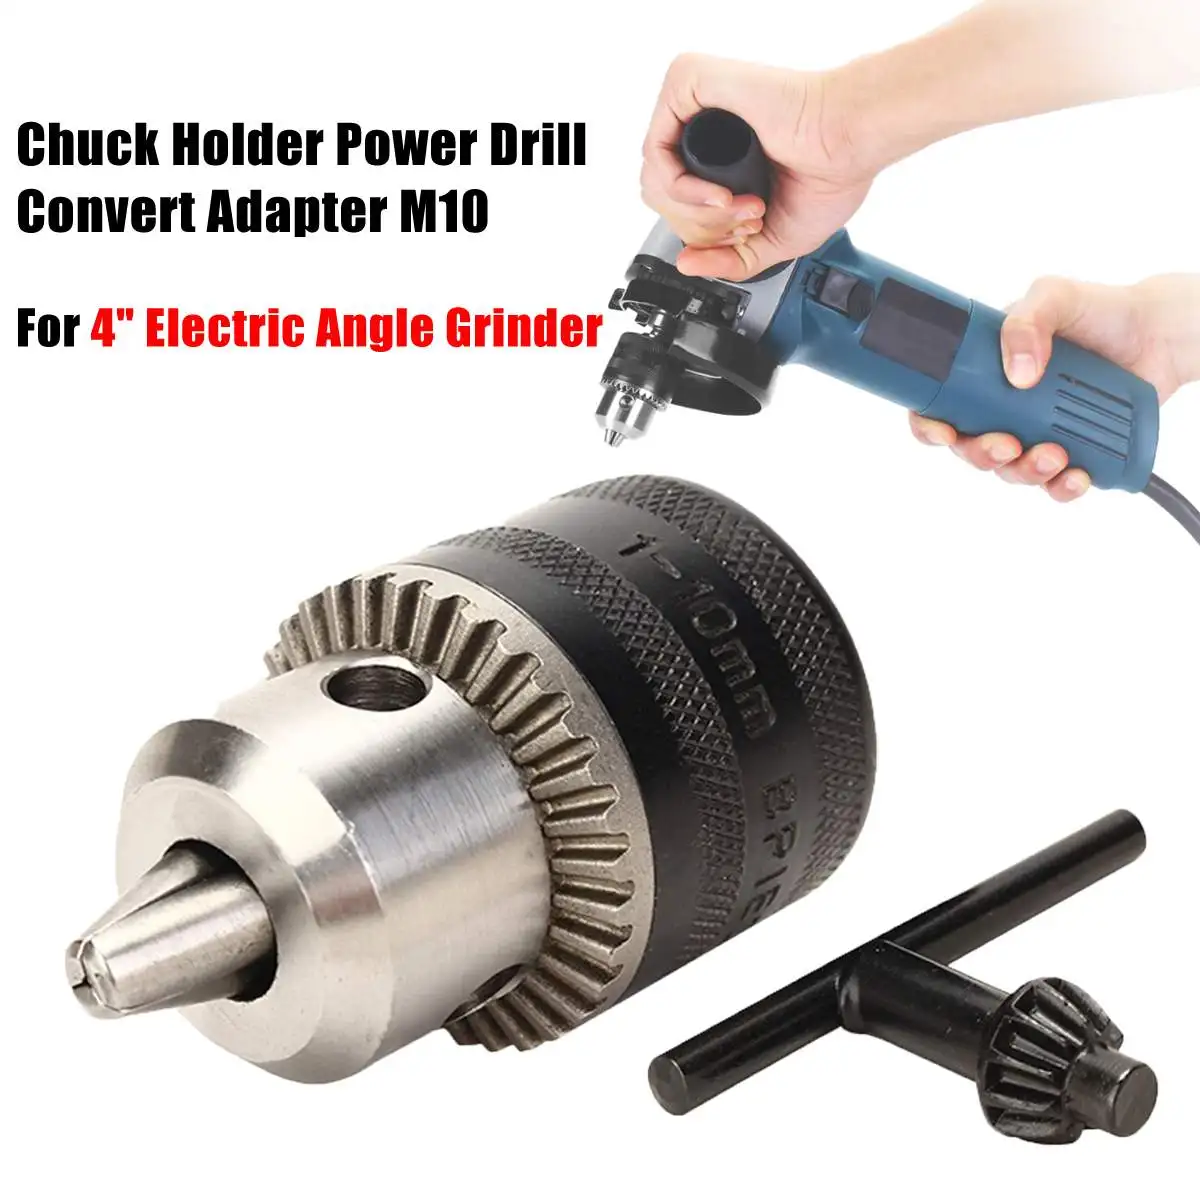 For Electric Angle Grinder Drill Chuck Power Drill Conversion Joint Adapter Tool 